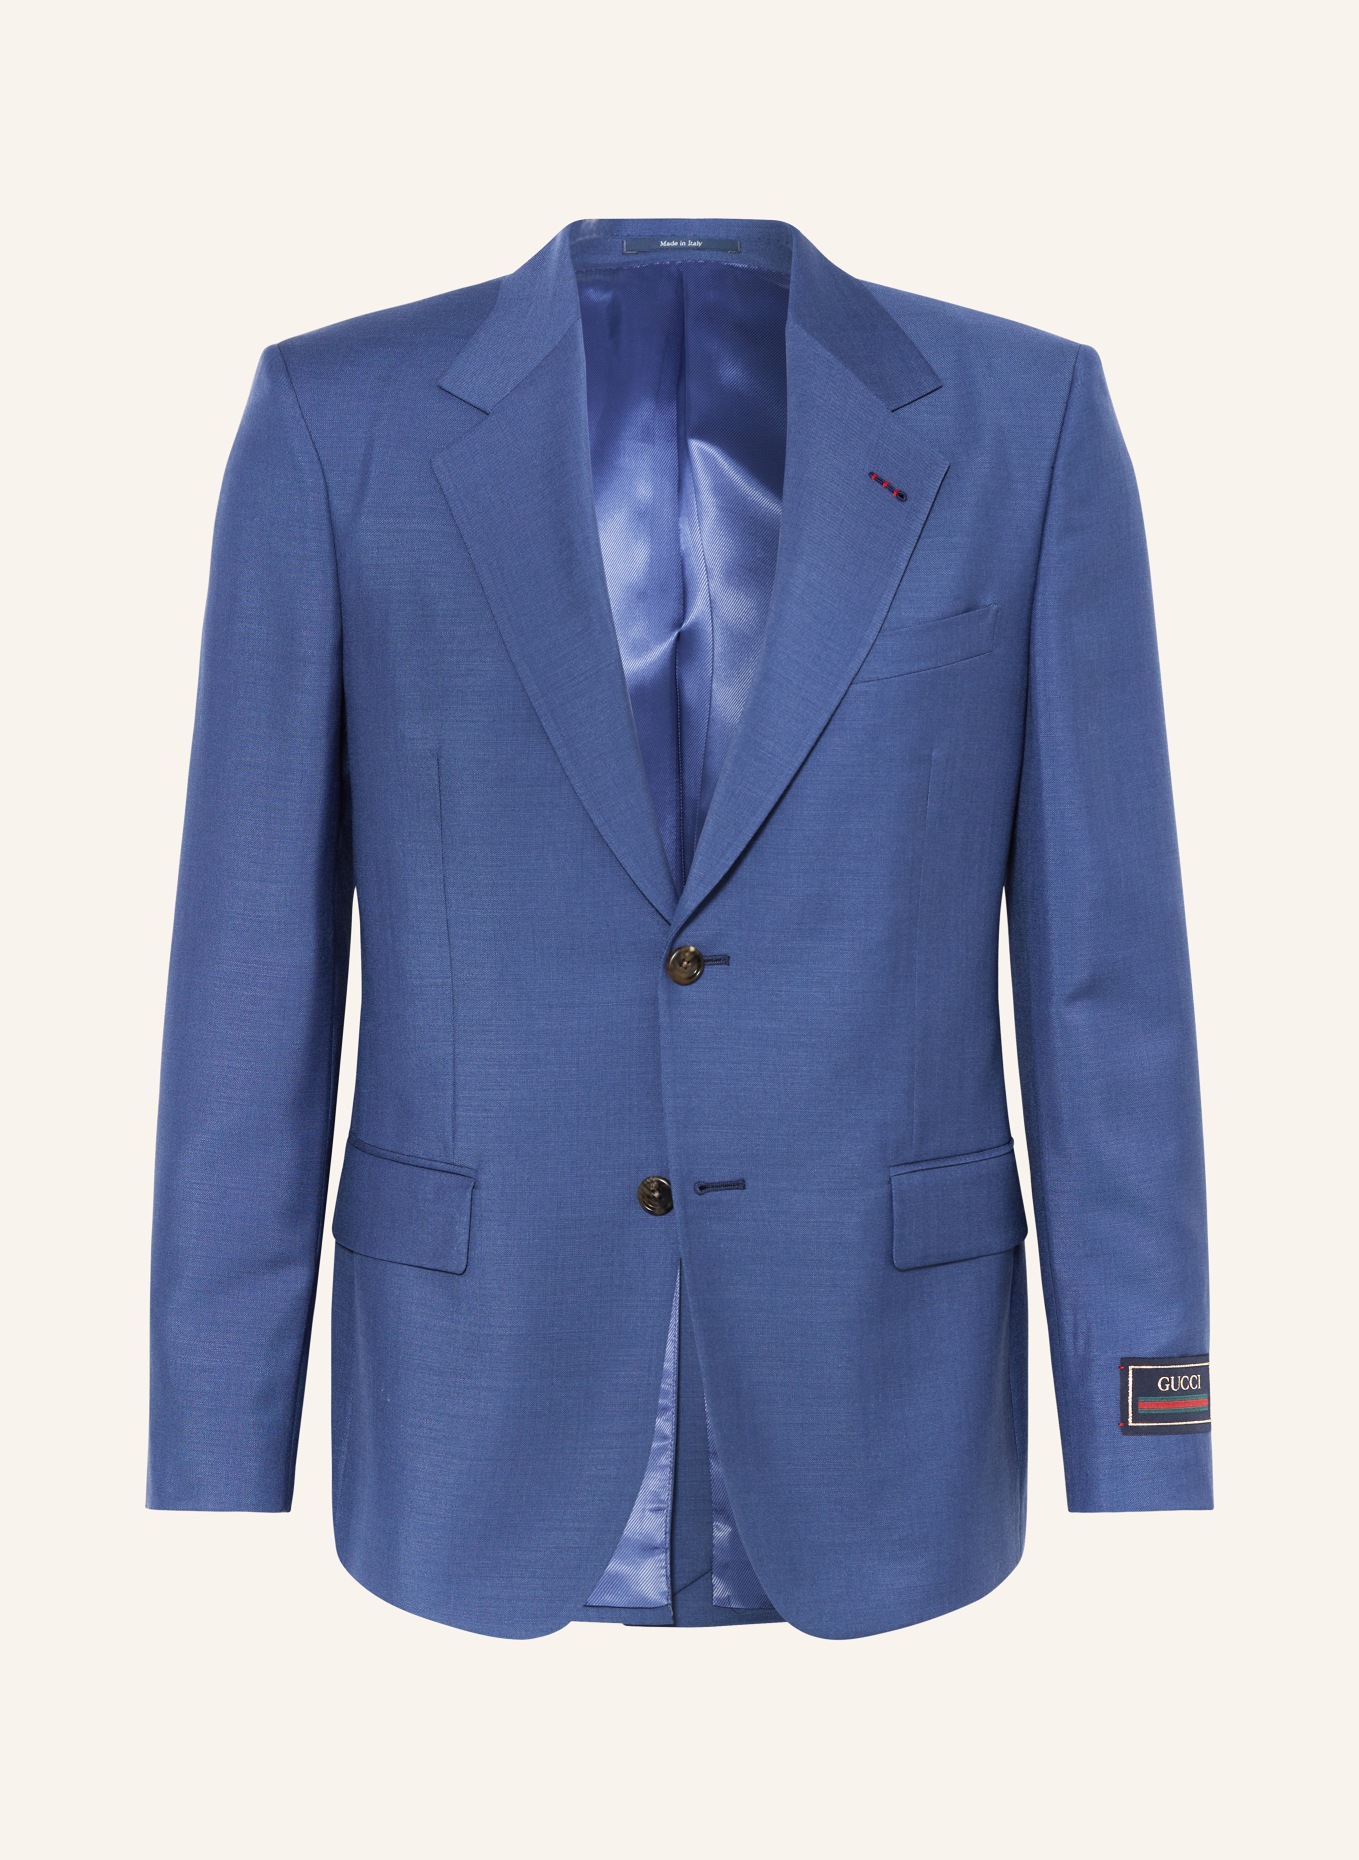 GUCCI Suit jacket extra slim fit, Color: 4719 STORMY SEA (LIGHT BLUE) (Image 1)